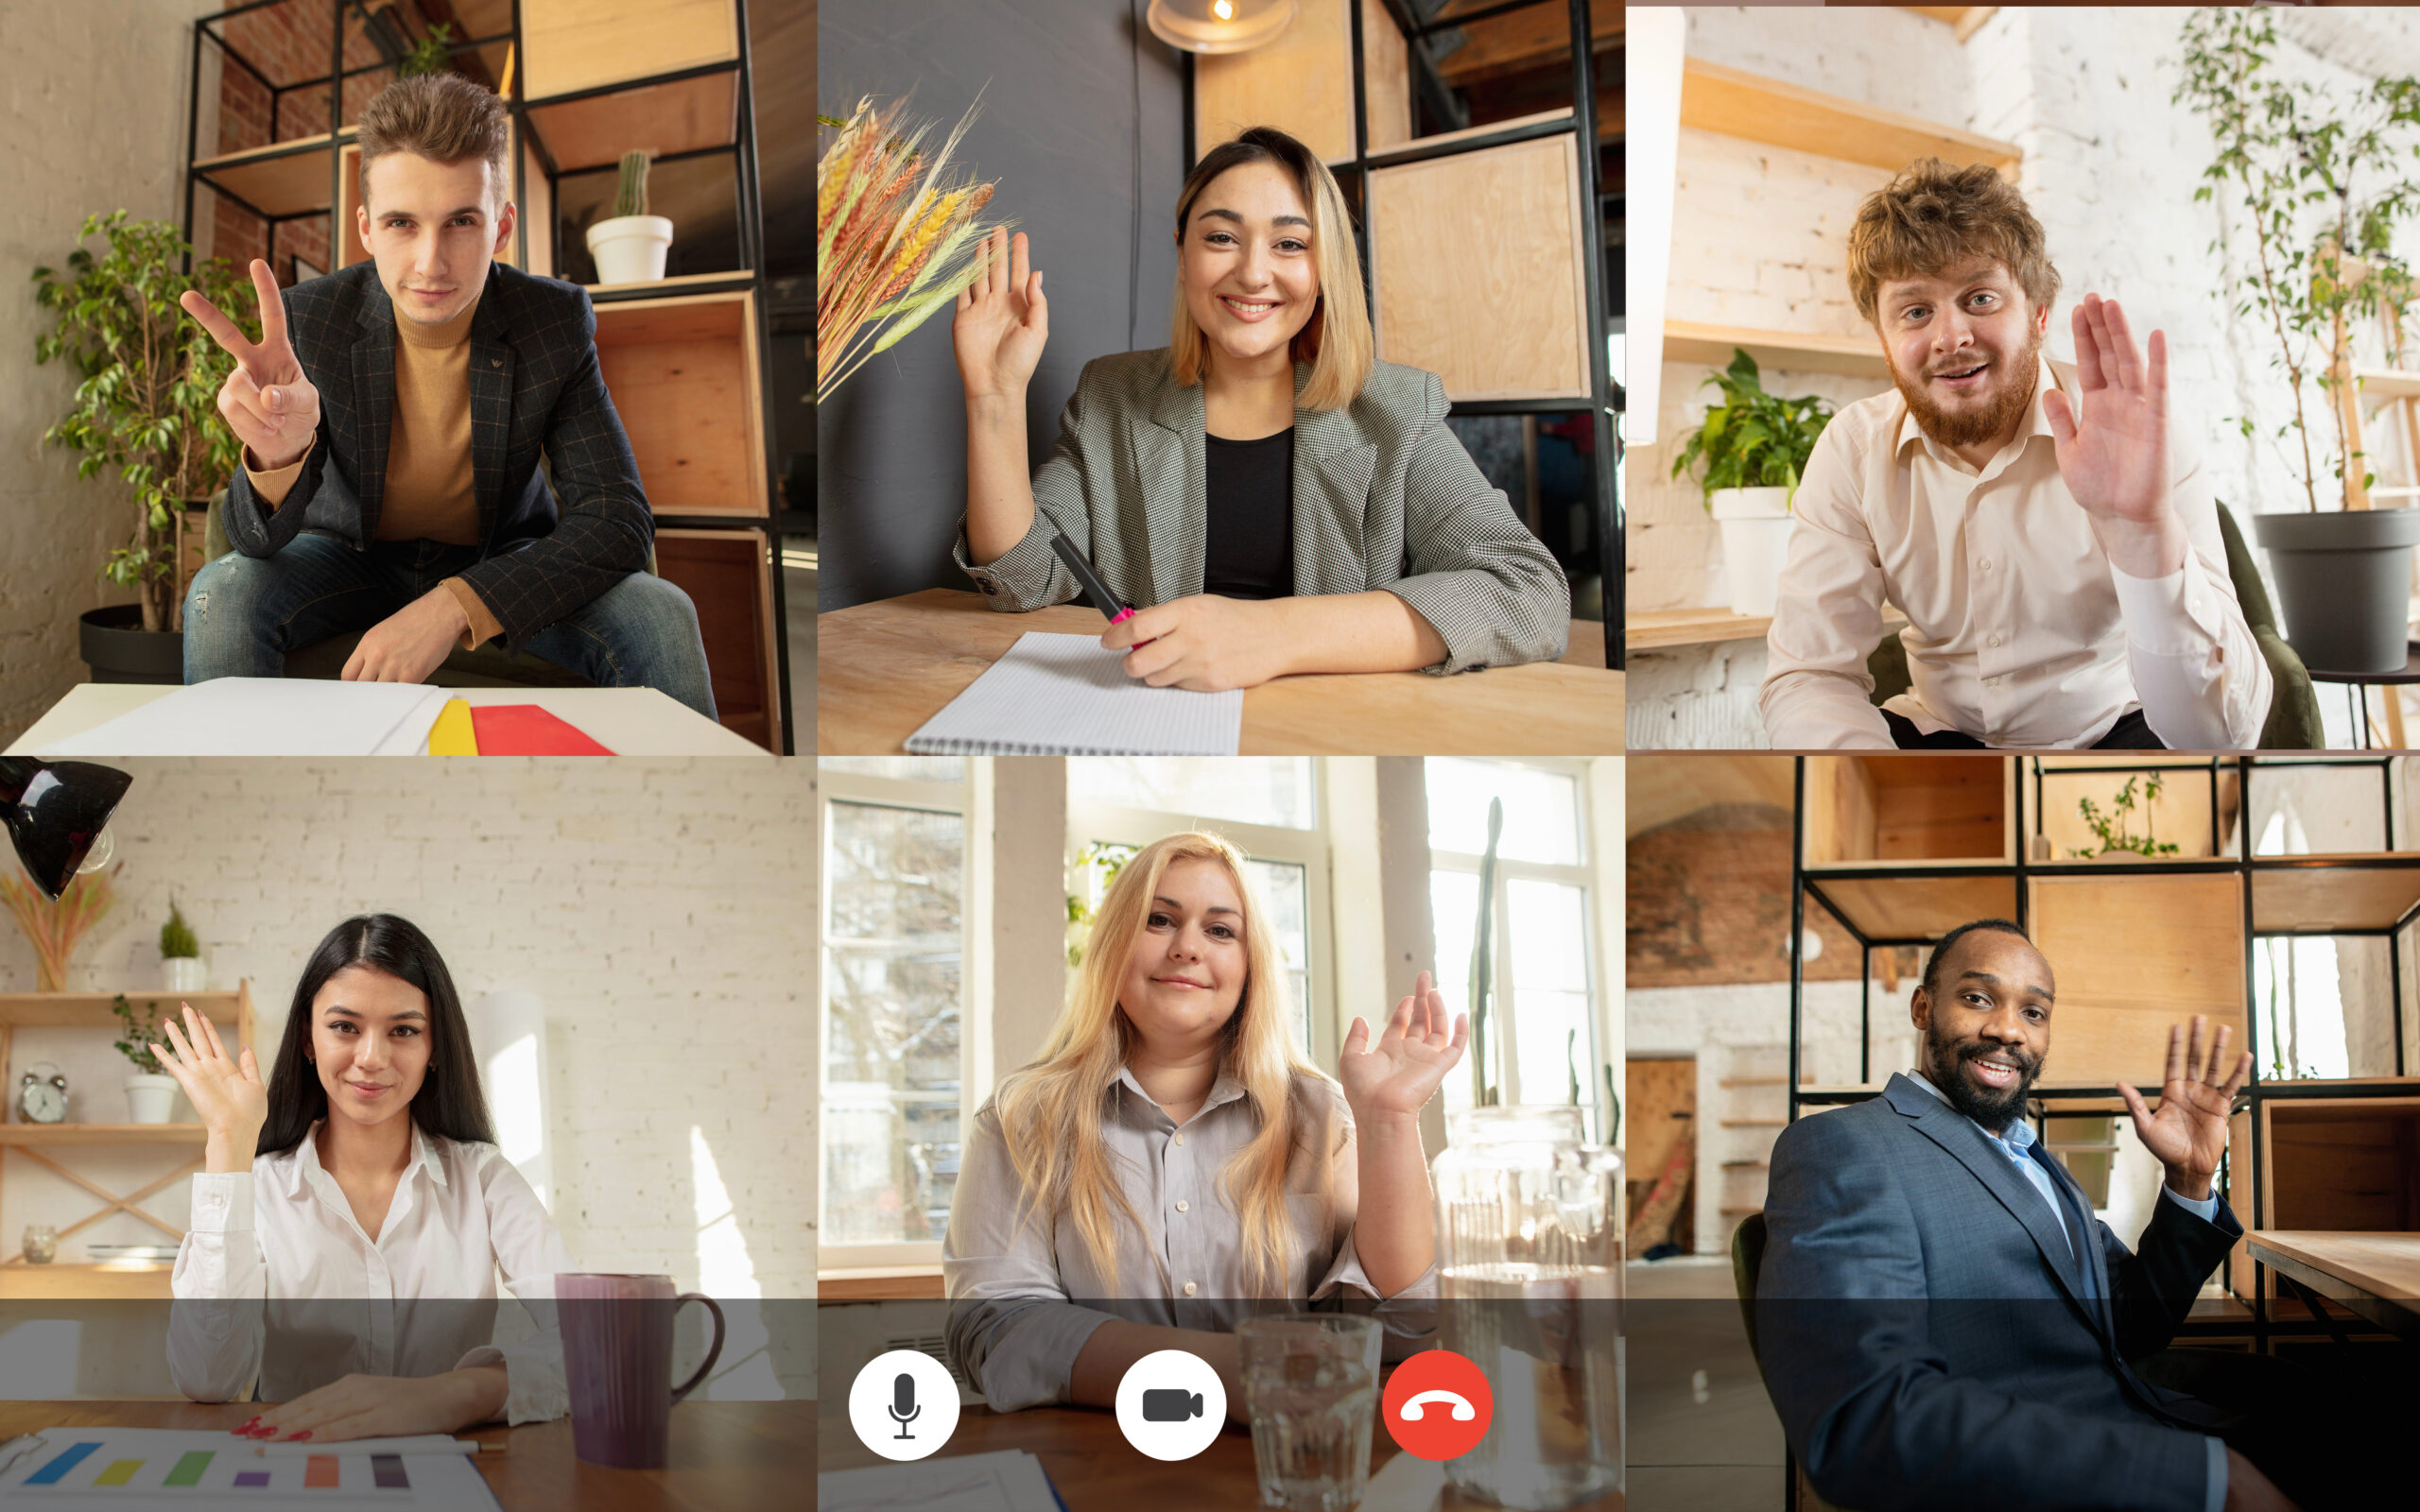 13 Tips to Look More Professional On Your Next Zoom Call